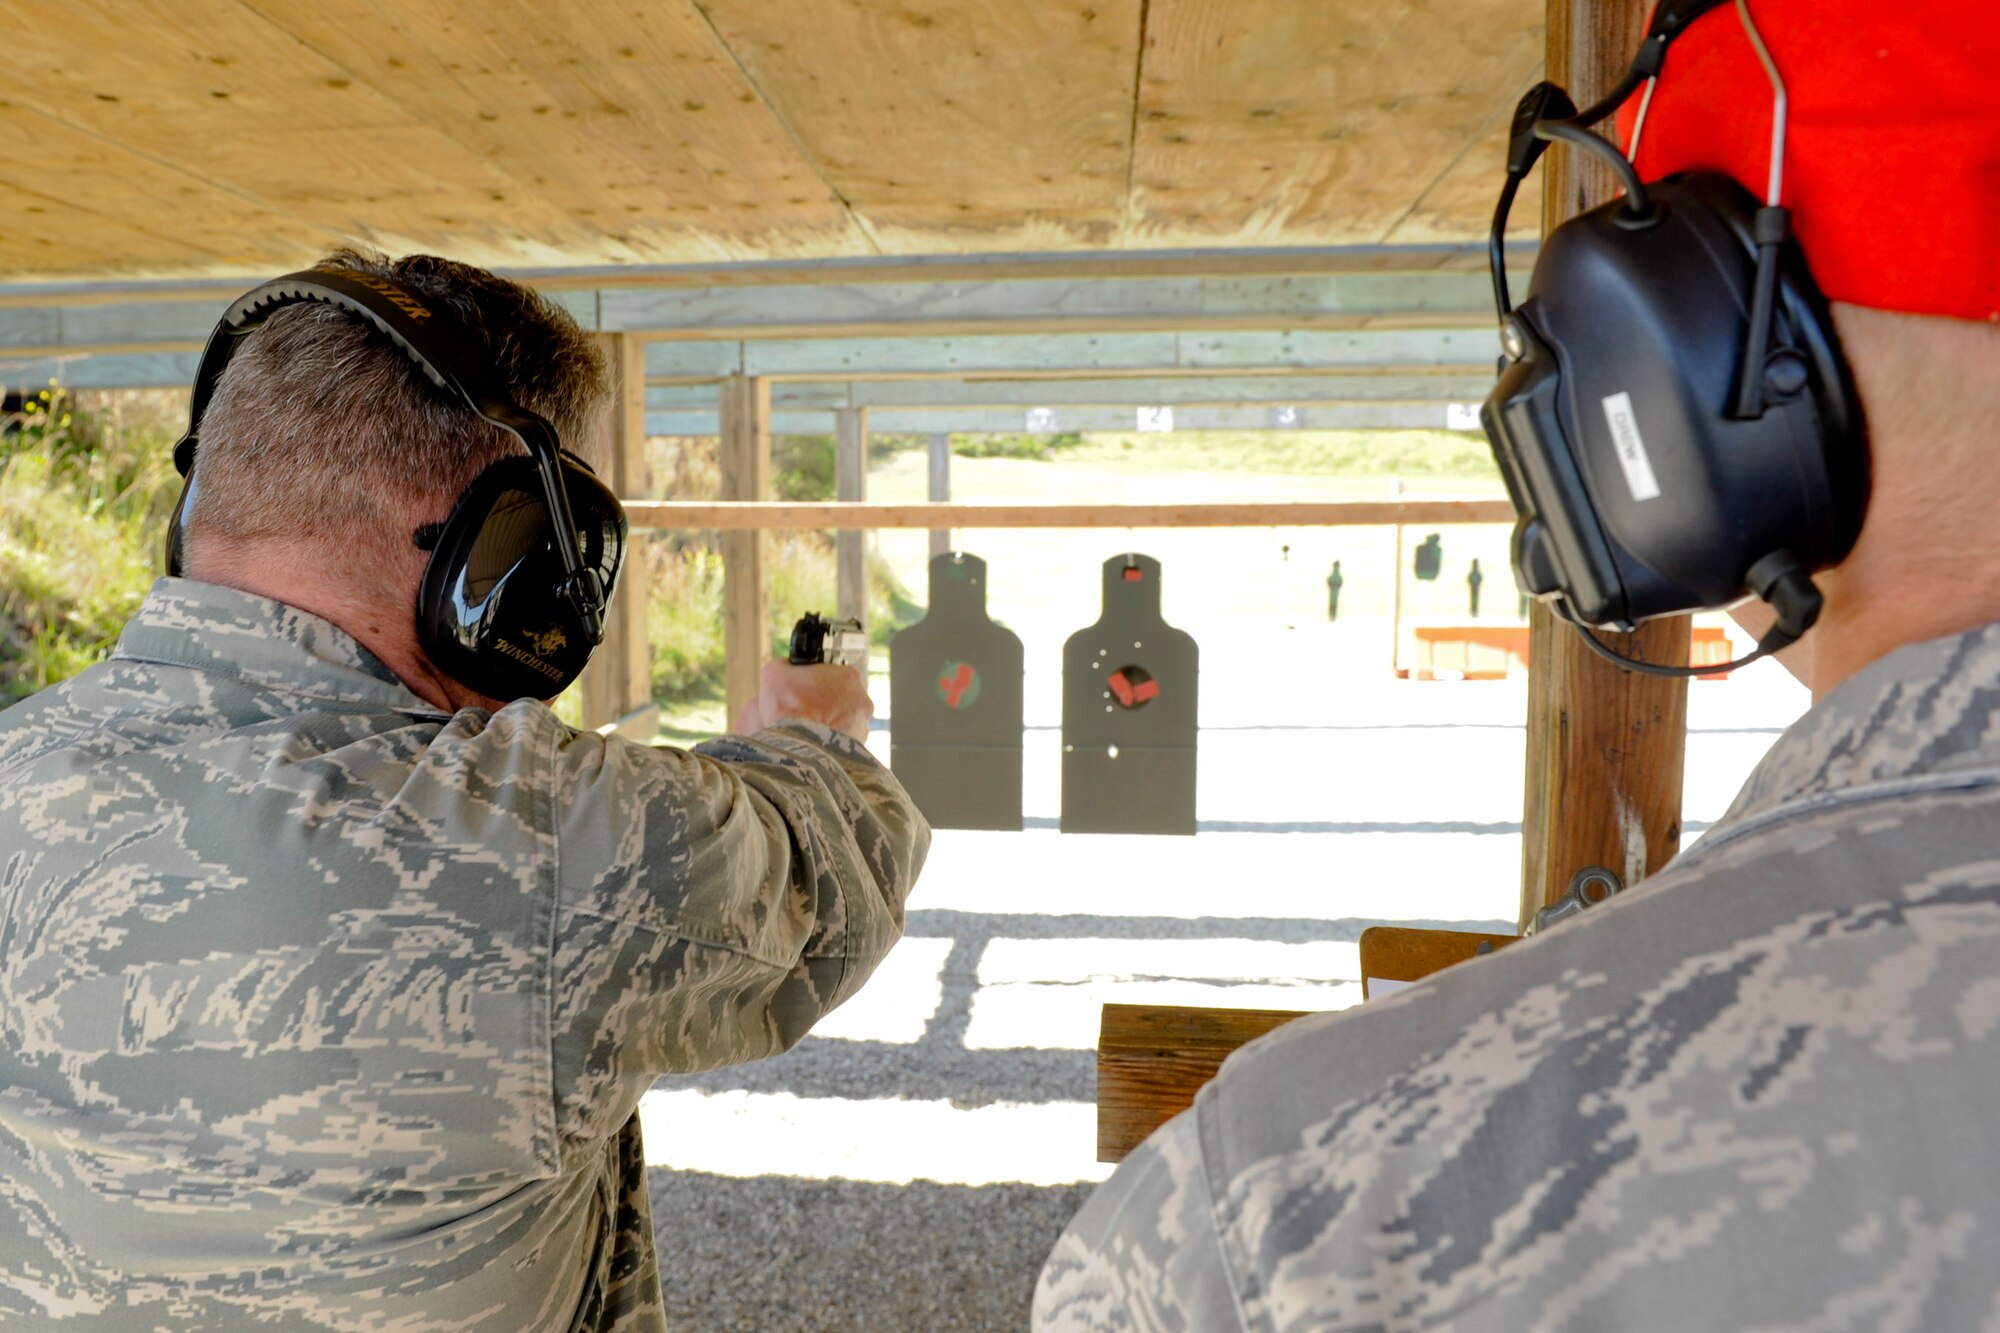 VANDENBERG AIR FORCE BASE, Calif.-- Col. Kelly Kirts, the 30th Mission Support Group commander, shoots at targets during a pistol competition at the combat arms training range here Monday, May 14, 2012. The competition was held in conjunction with National Police Week, an annual celebration that recognizes the service and sacrifice of U.S. law enforcement personnel. (U.S. Air Force photo/Staff Sgt. Levi Riendeau)